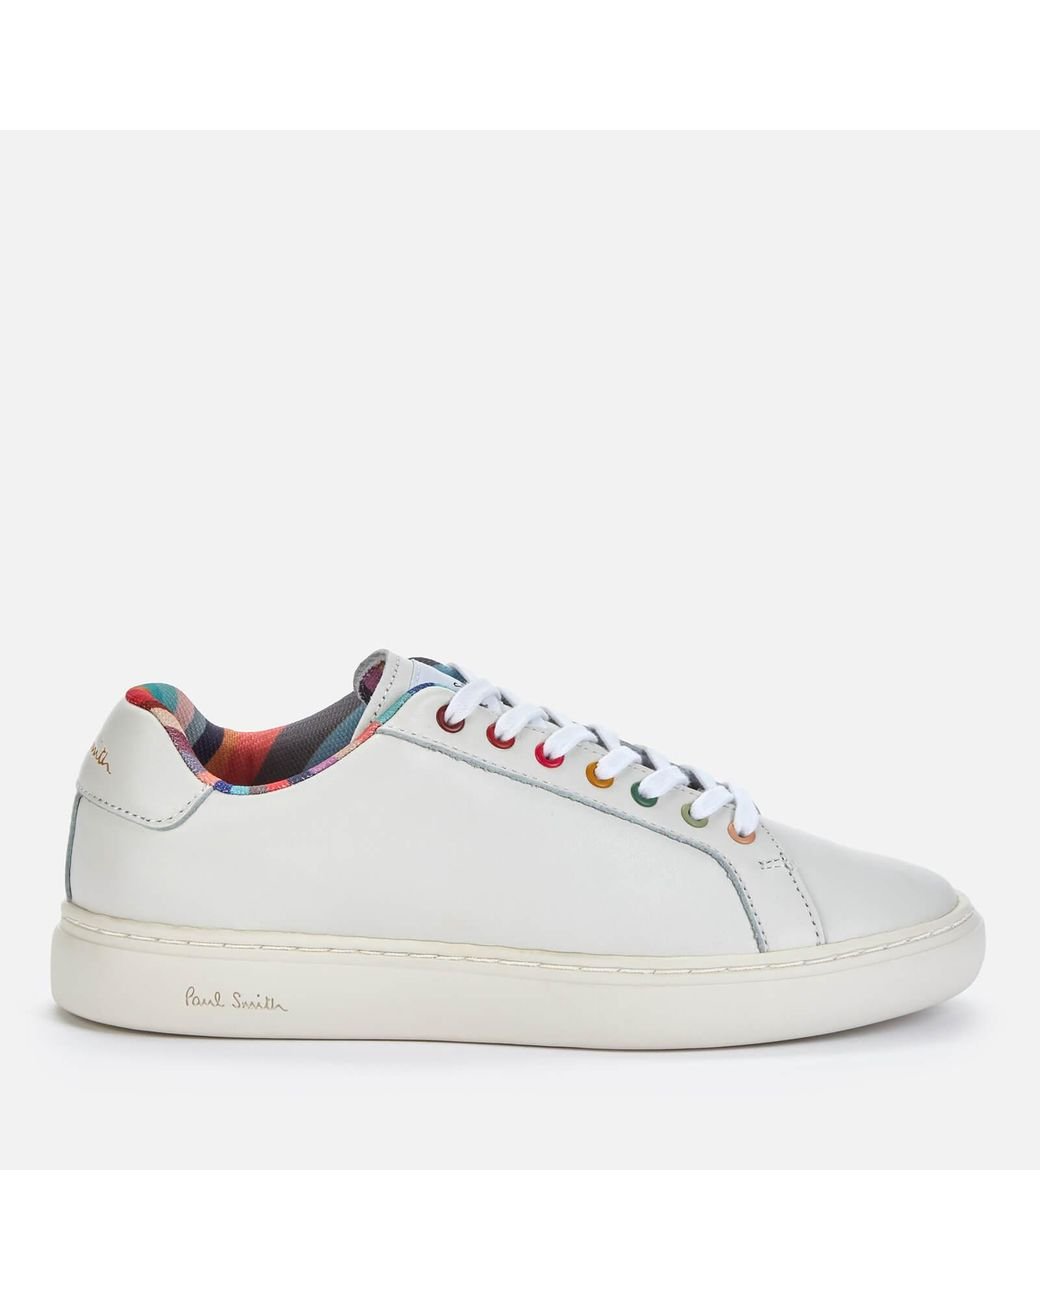 Paul Smith Lapin Leather Low Top Trainers in White - Lyst